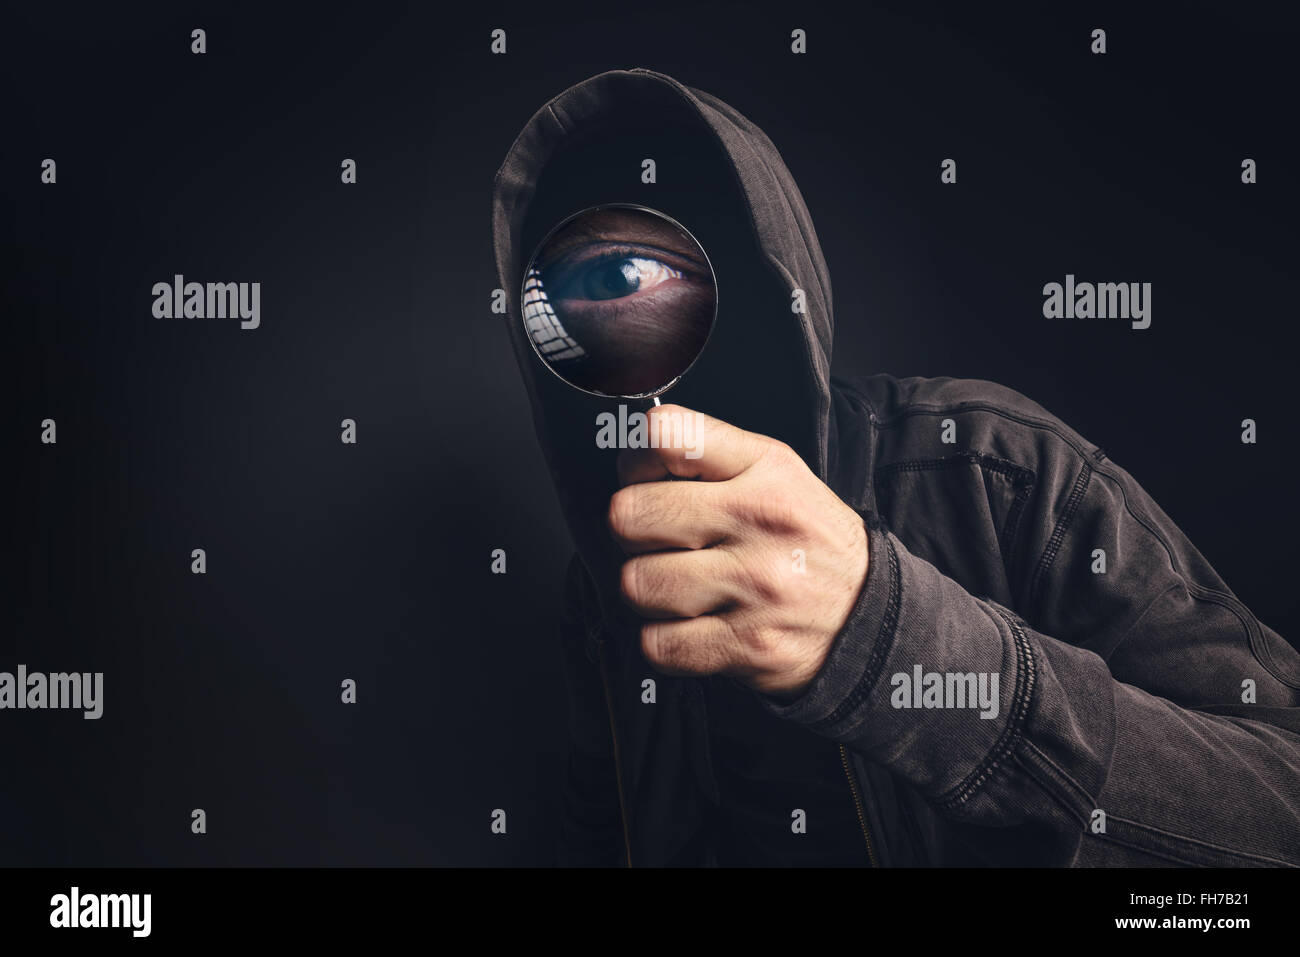 Bizarre hooded spooky person with magnifying glass, focus on enlarged eye peeking at you Stock Photo